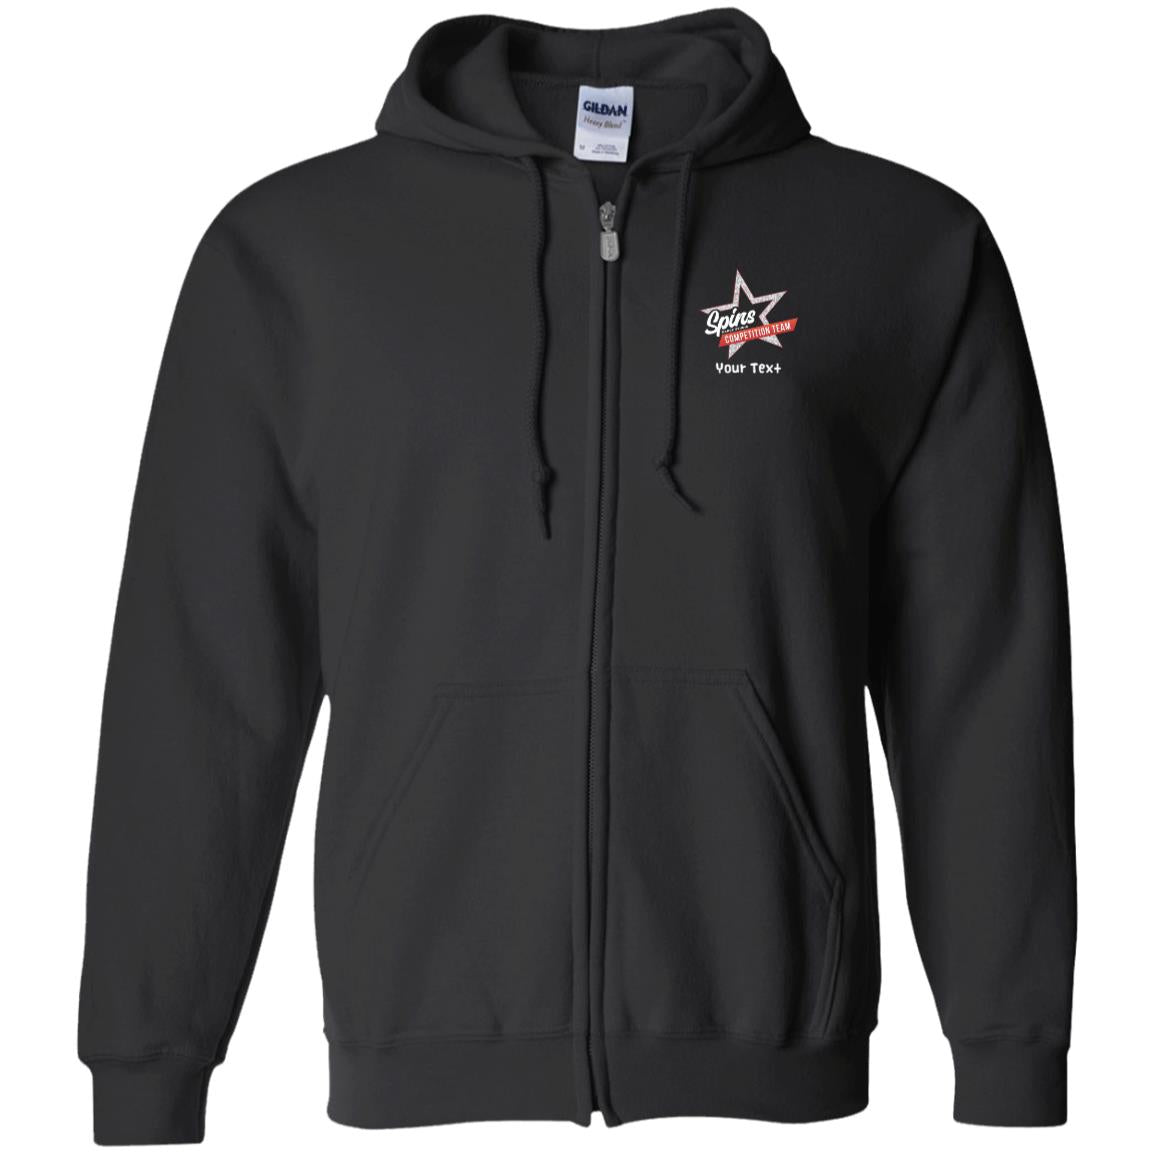 Spins Competition Team Zip Up Hooded Sweatshirt - With Personalization